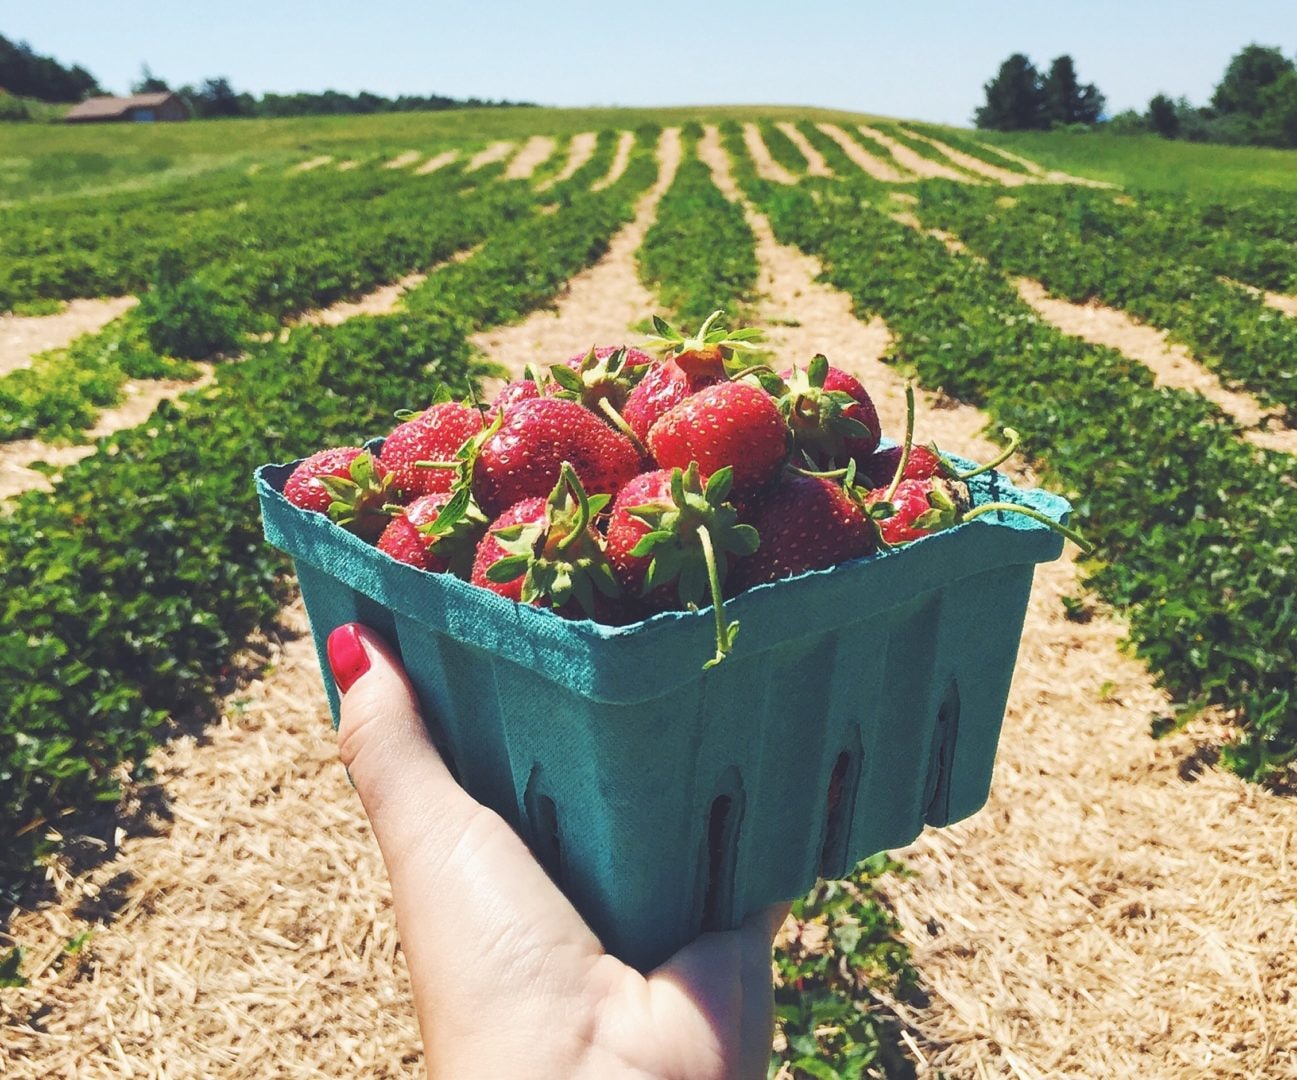 The Best 5 Farms for Strawberry Picking Near Chicago Resources